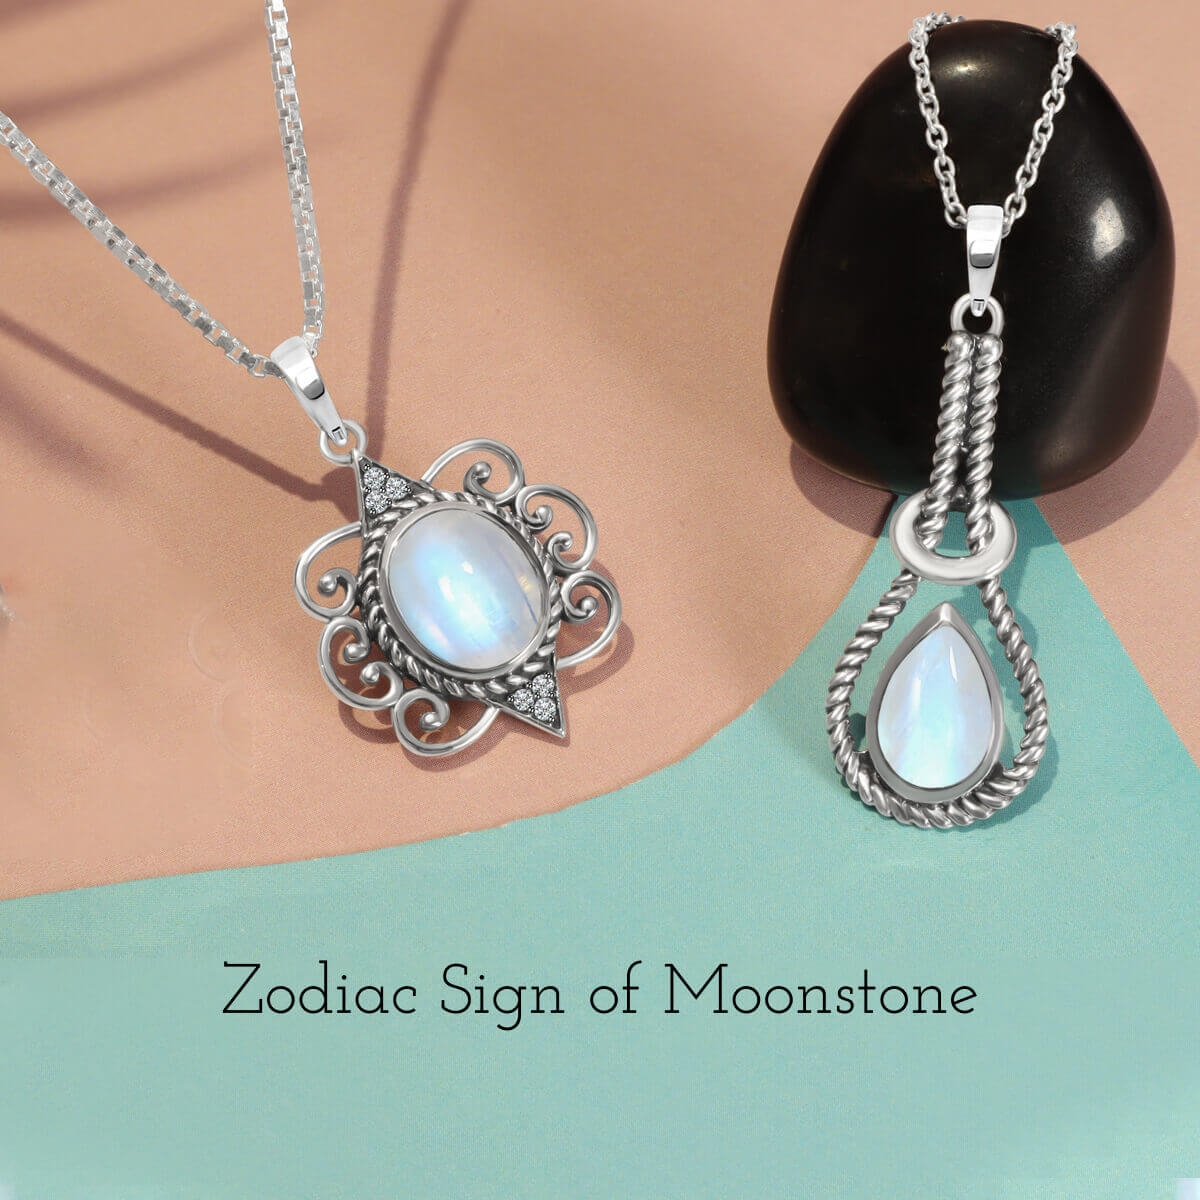 Zodiac sign associated to Moonstone